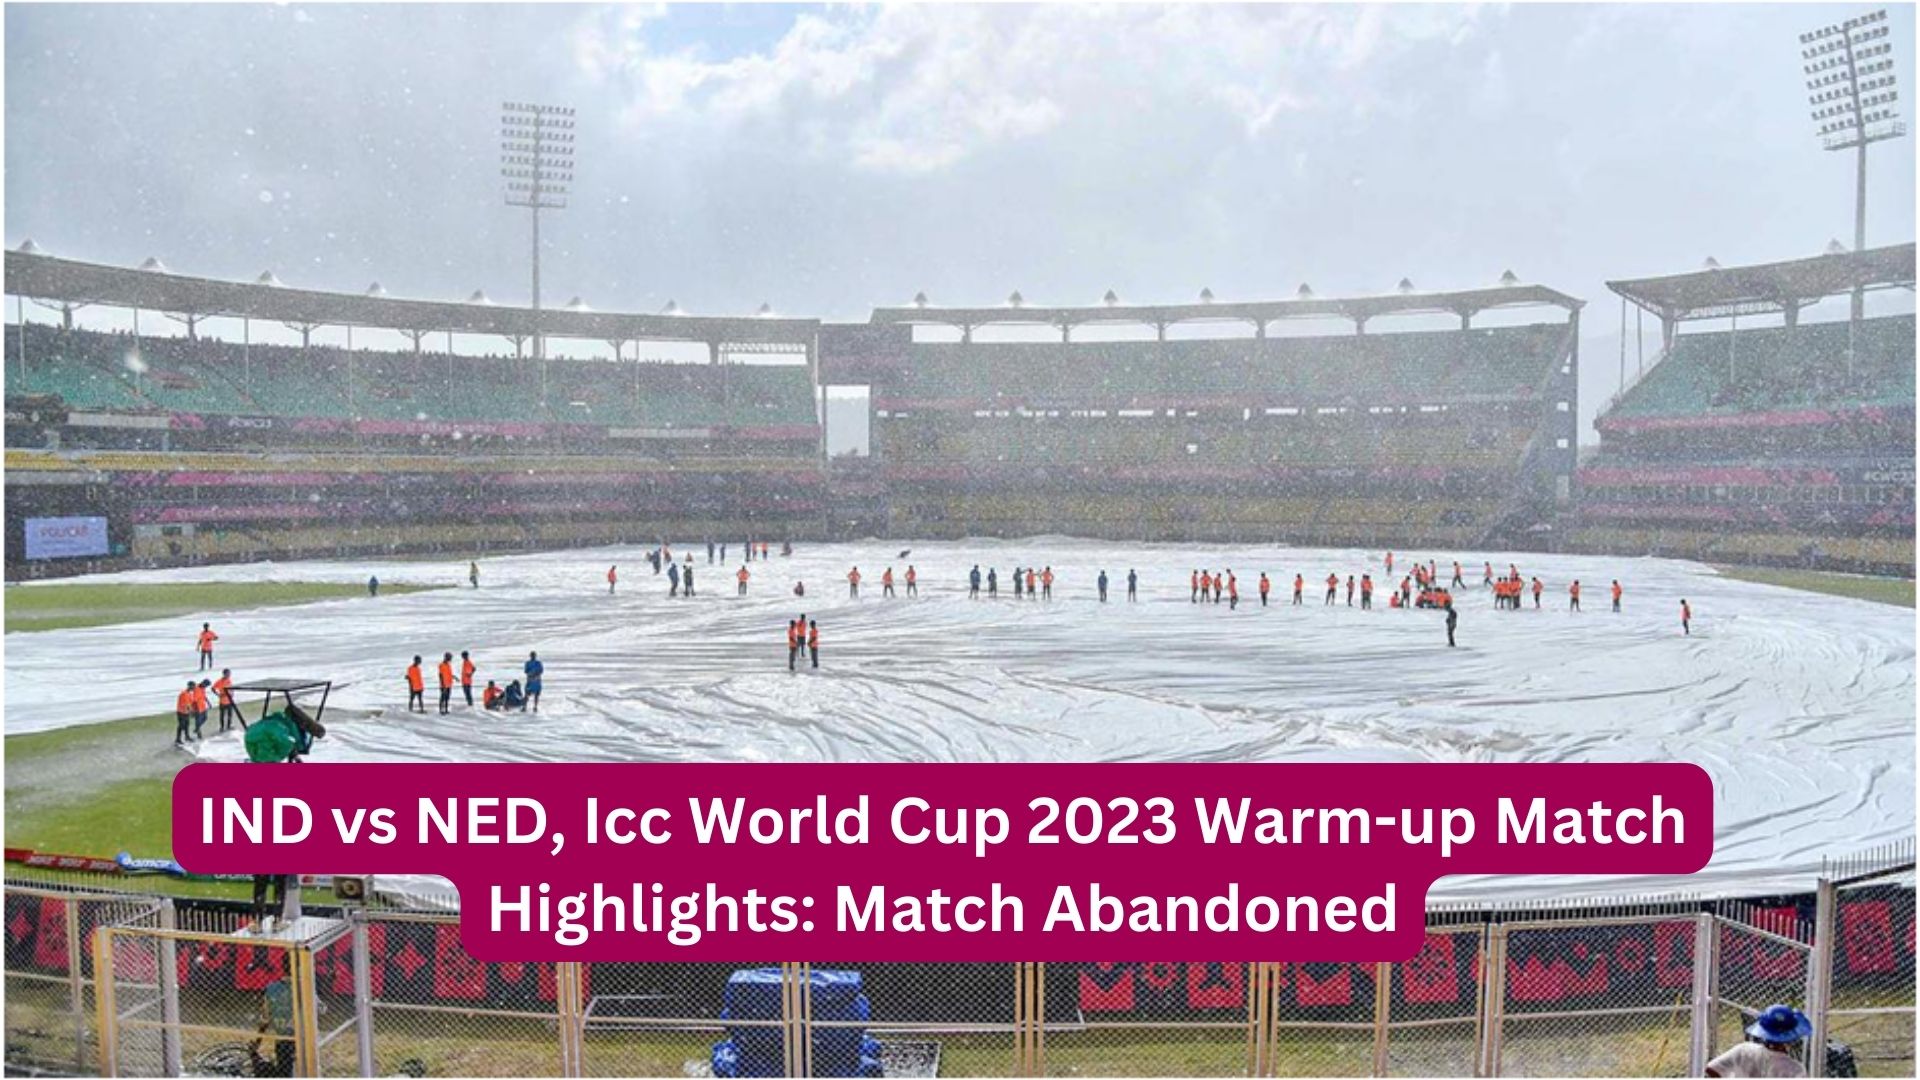 IND vs NED, Icc World Cup 2023 Warm-up Match Highlights: Match Abandoned